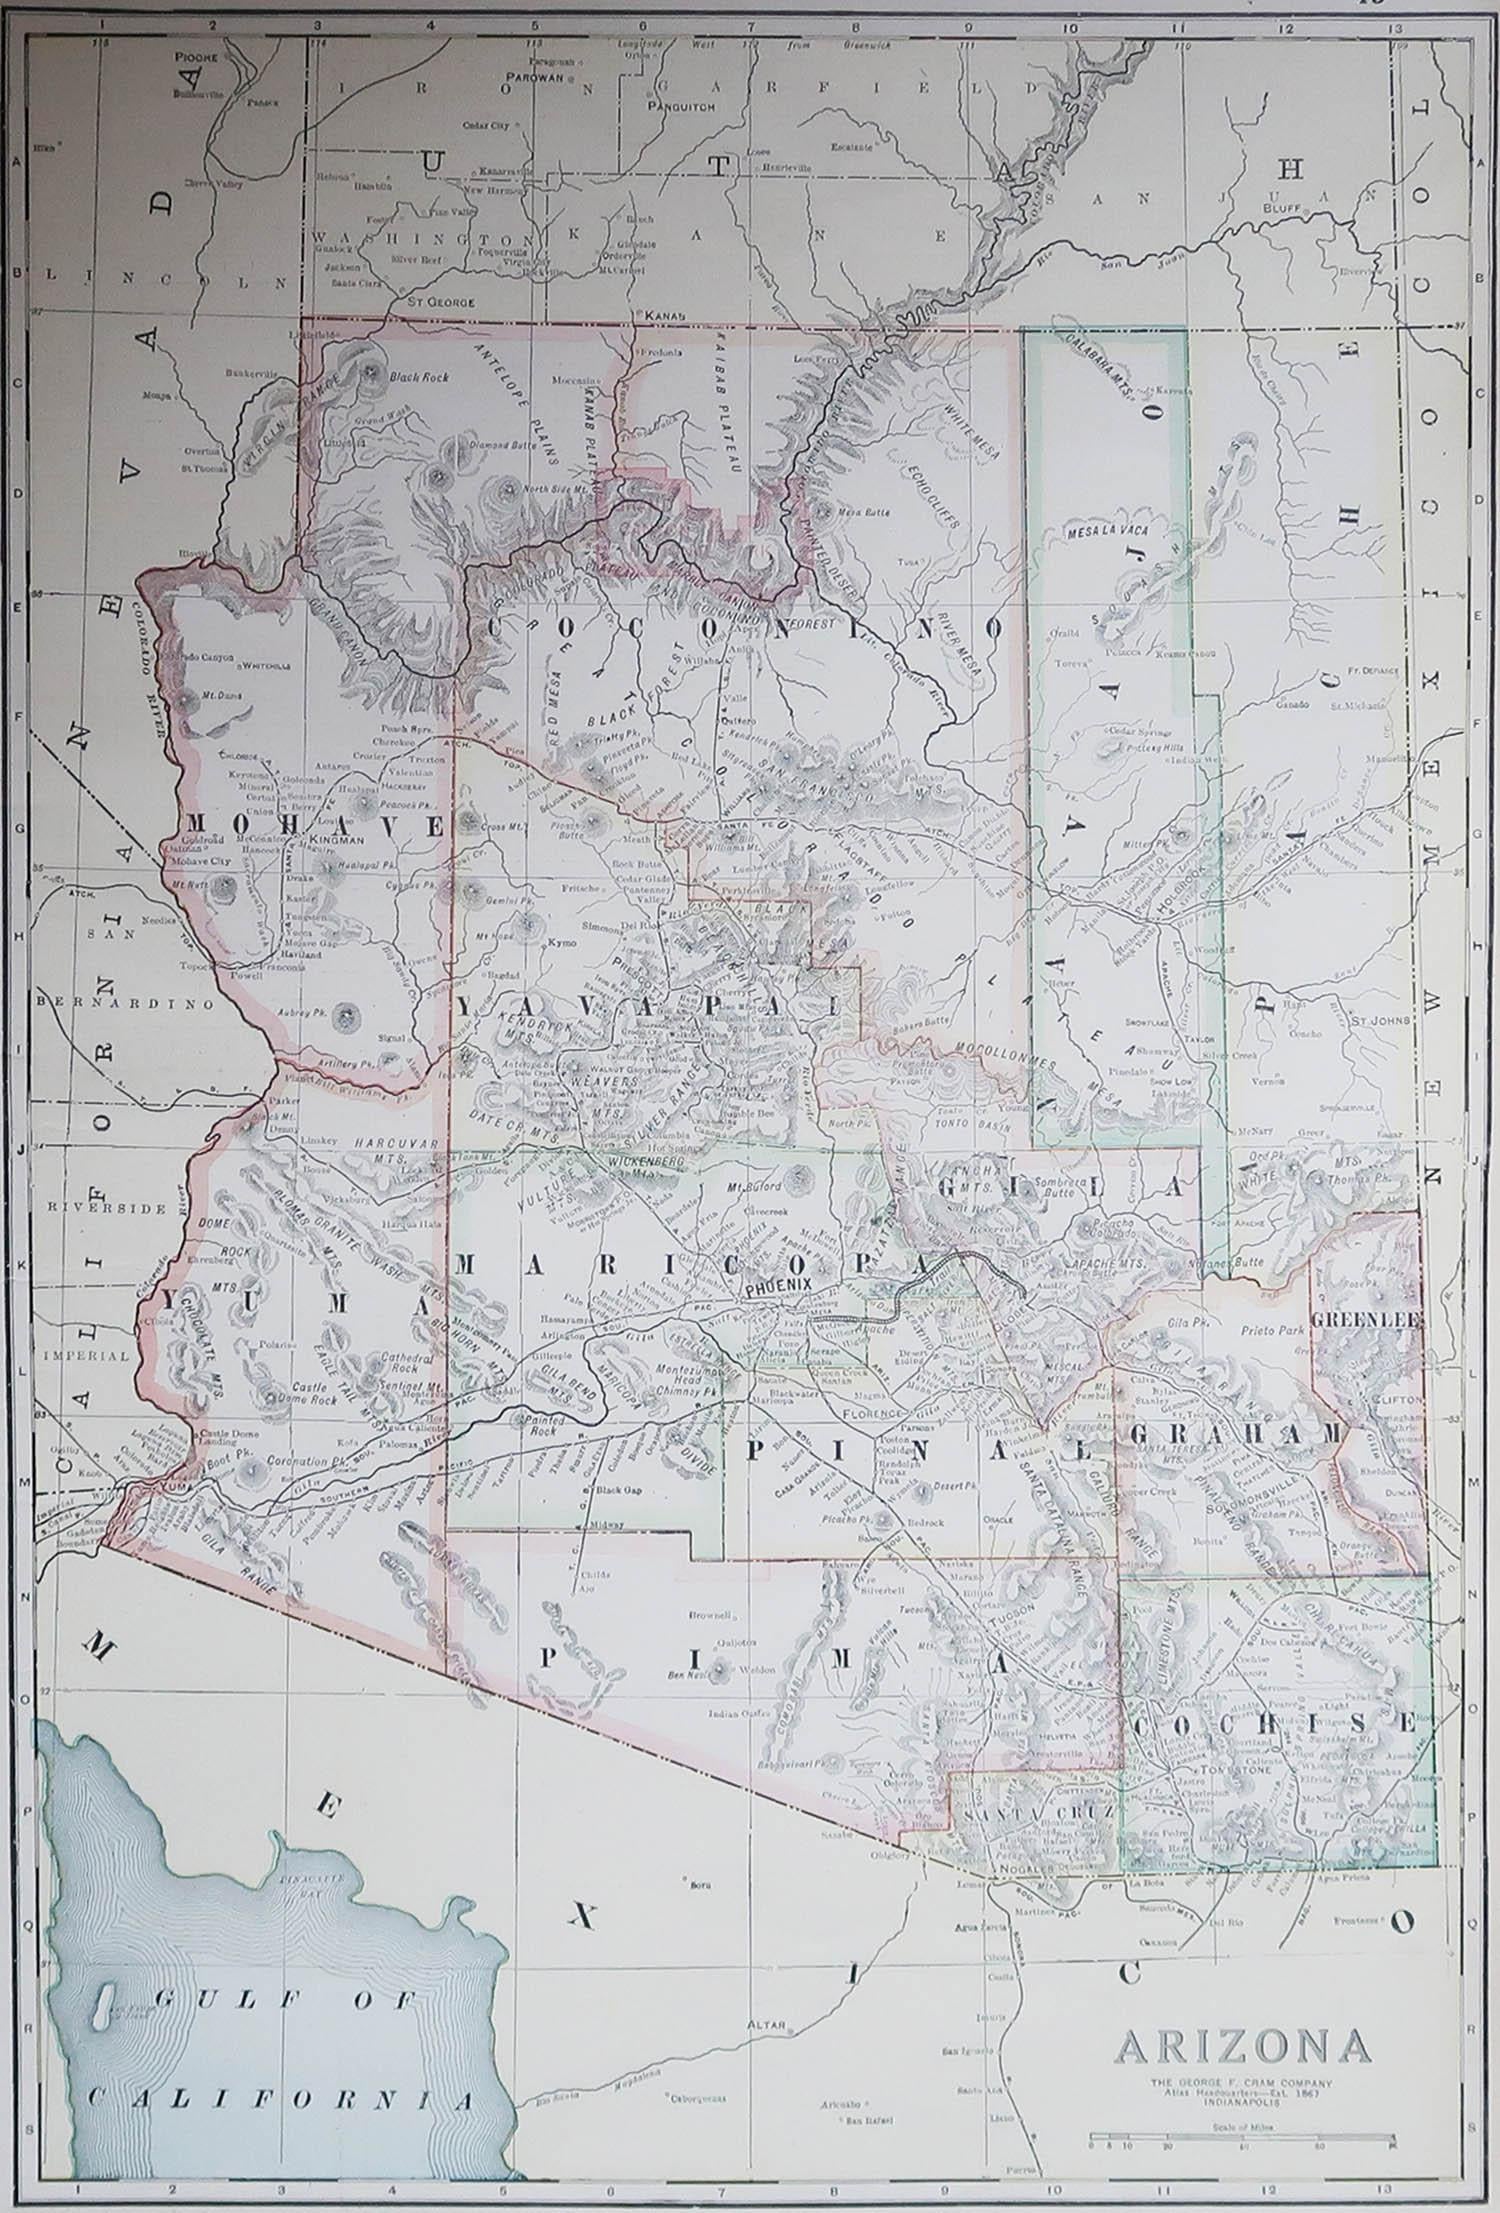 Fabulous map of Arizona

Original color.

Engraved and printed by the George F. Cram Company, Indianapolis.

Published, C.1900.

Unframed.

Free shipping.